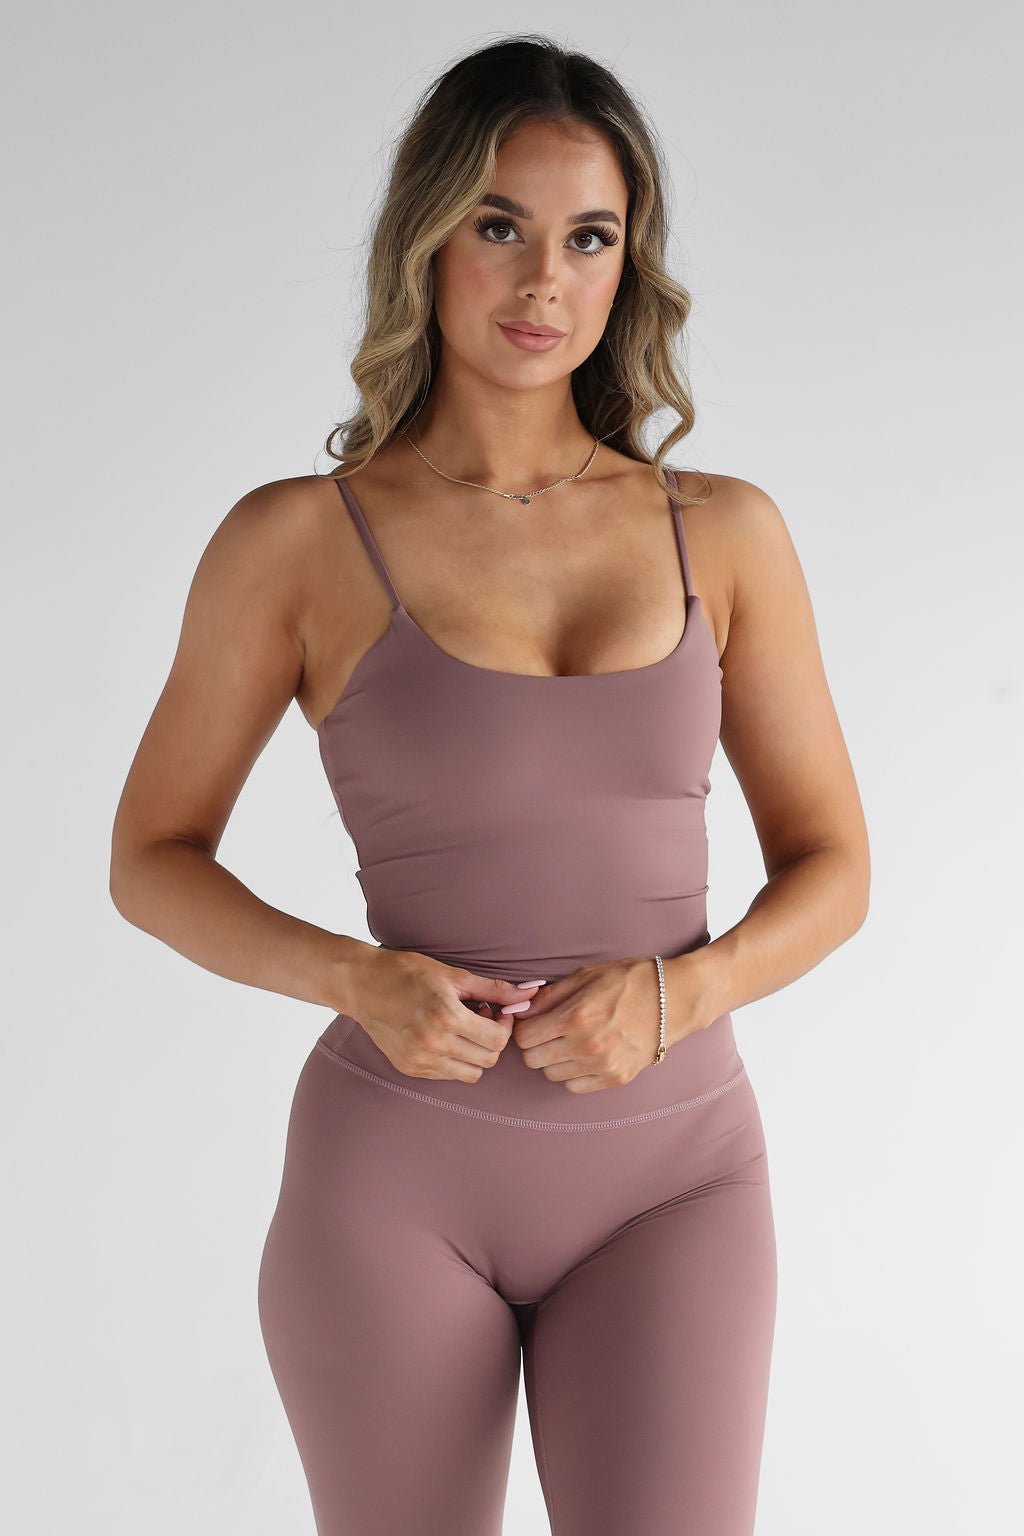 SKIMS Everyday Sculpt High Waisted Brief Tan - $32 (11% Off